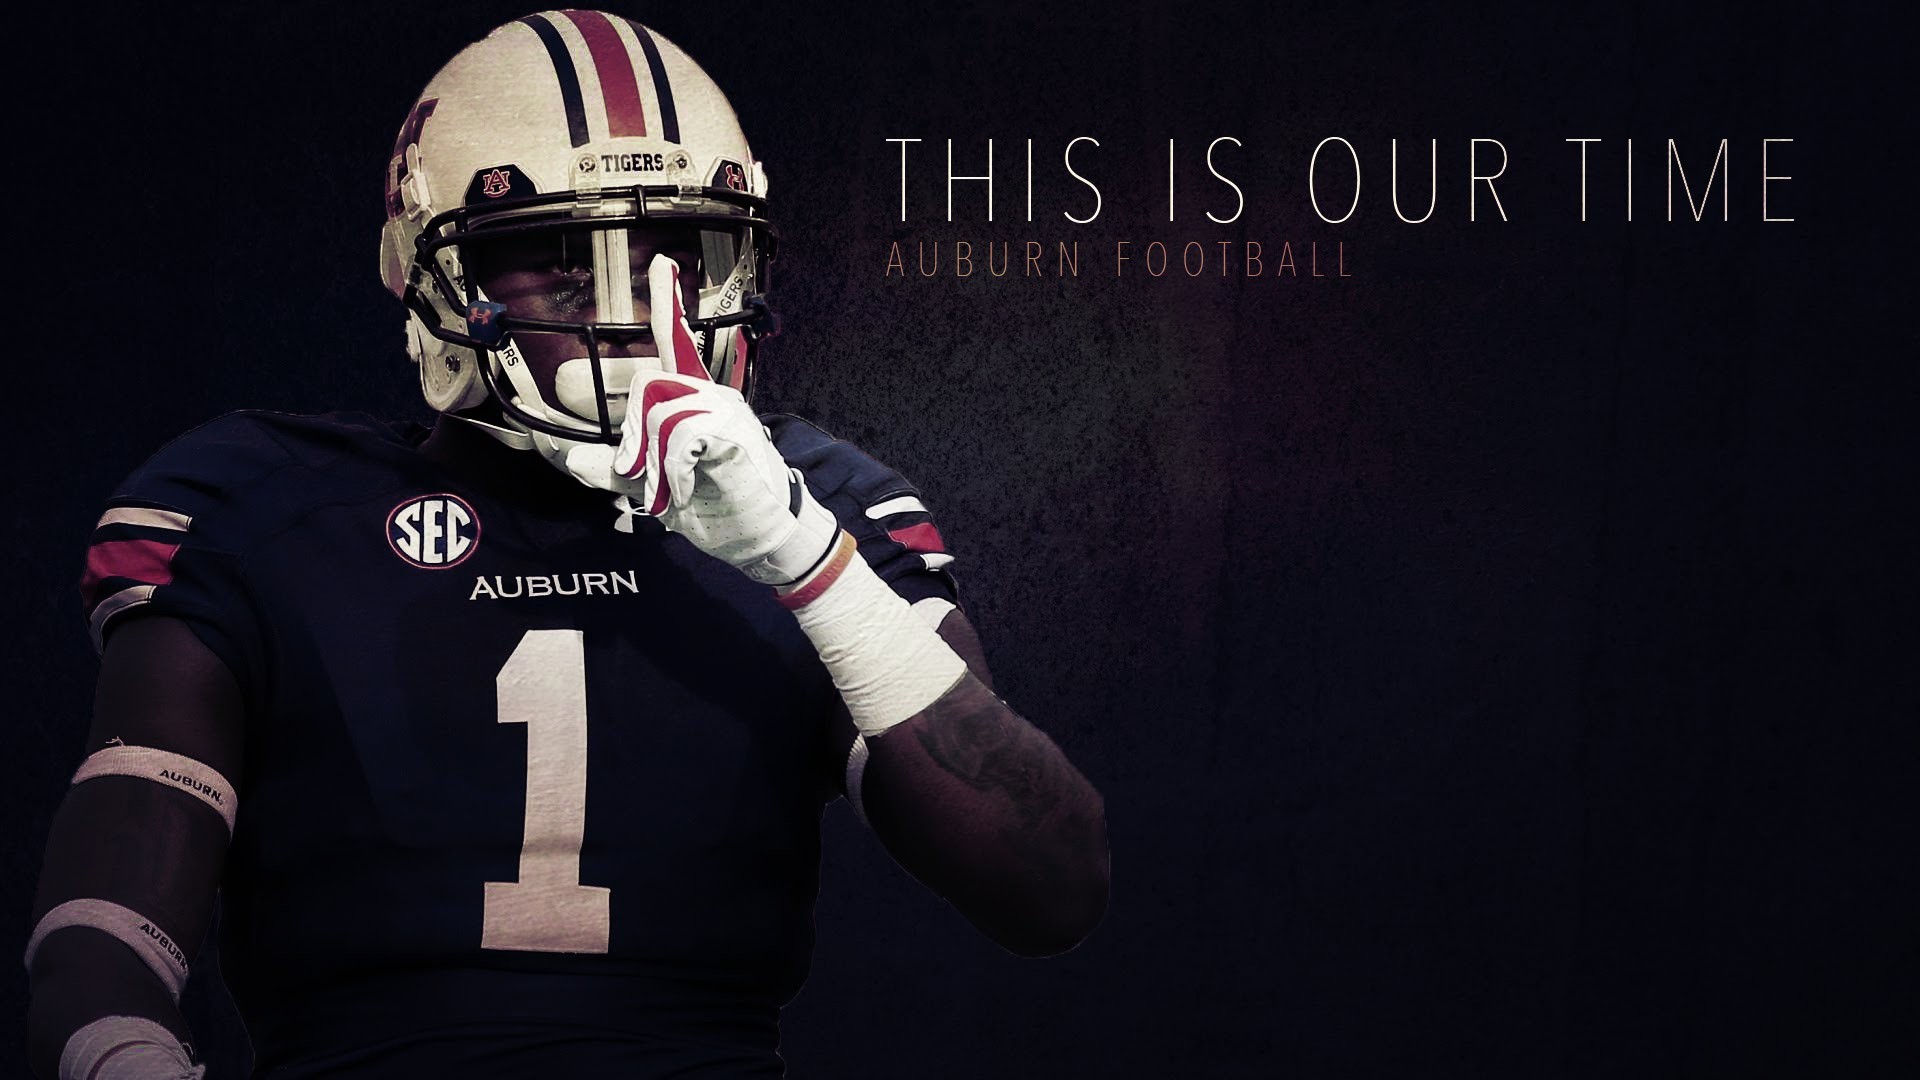 1920x1080 ... Auburn Tigers Football BackgroundFor Desktop, Laptop and Mobiles. Here  You Can Download More than 5 Million Photography collections Uploaded By  Users.